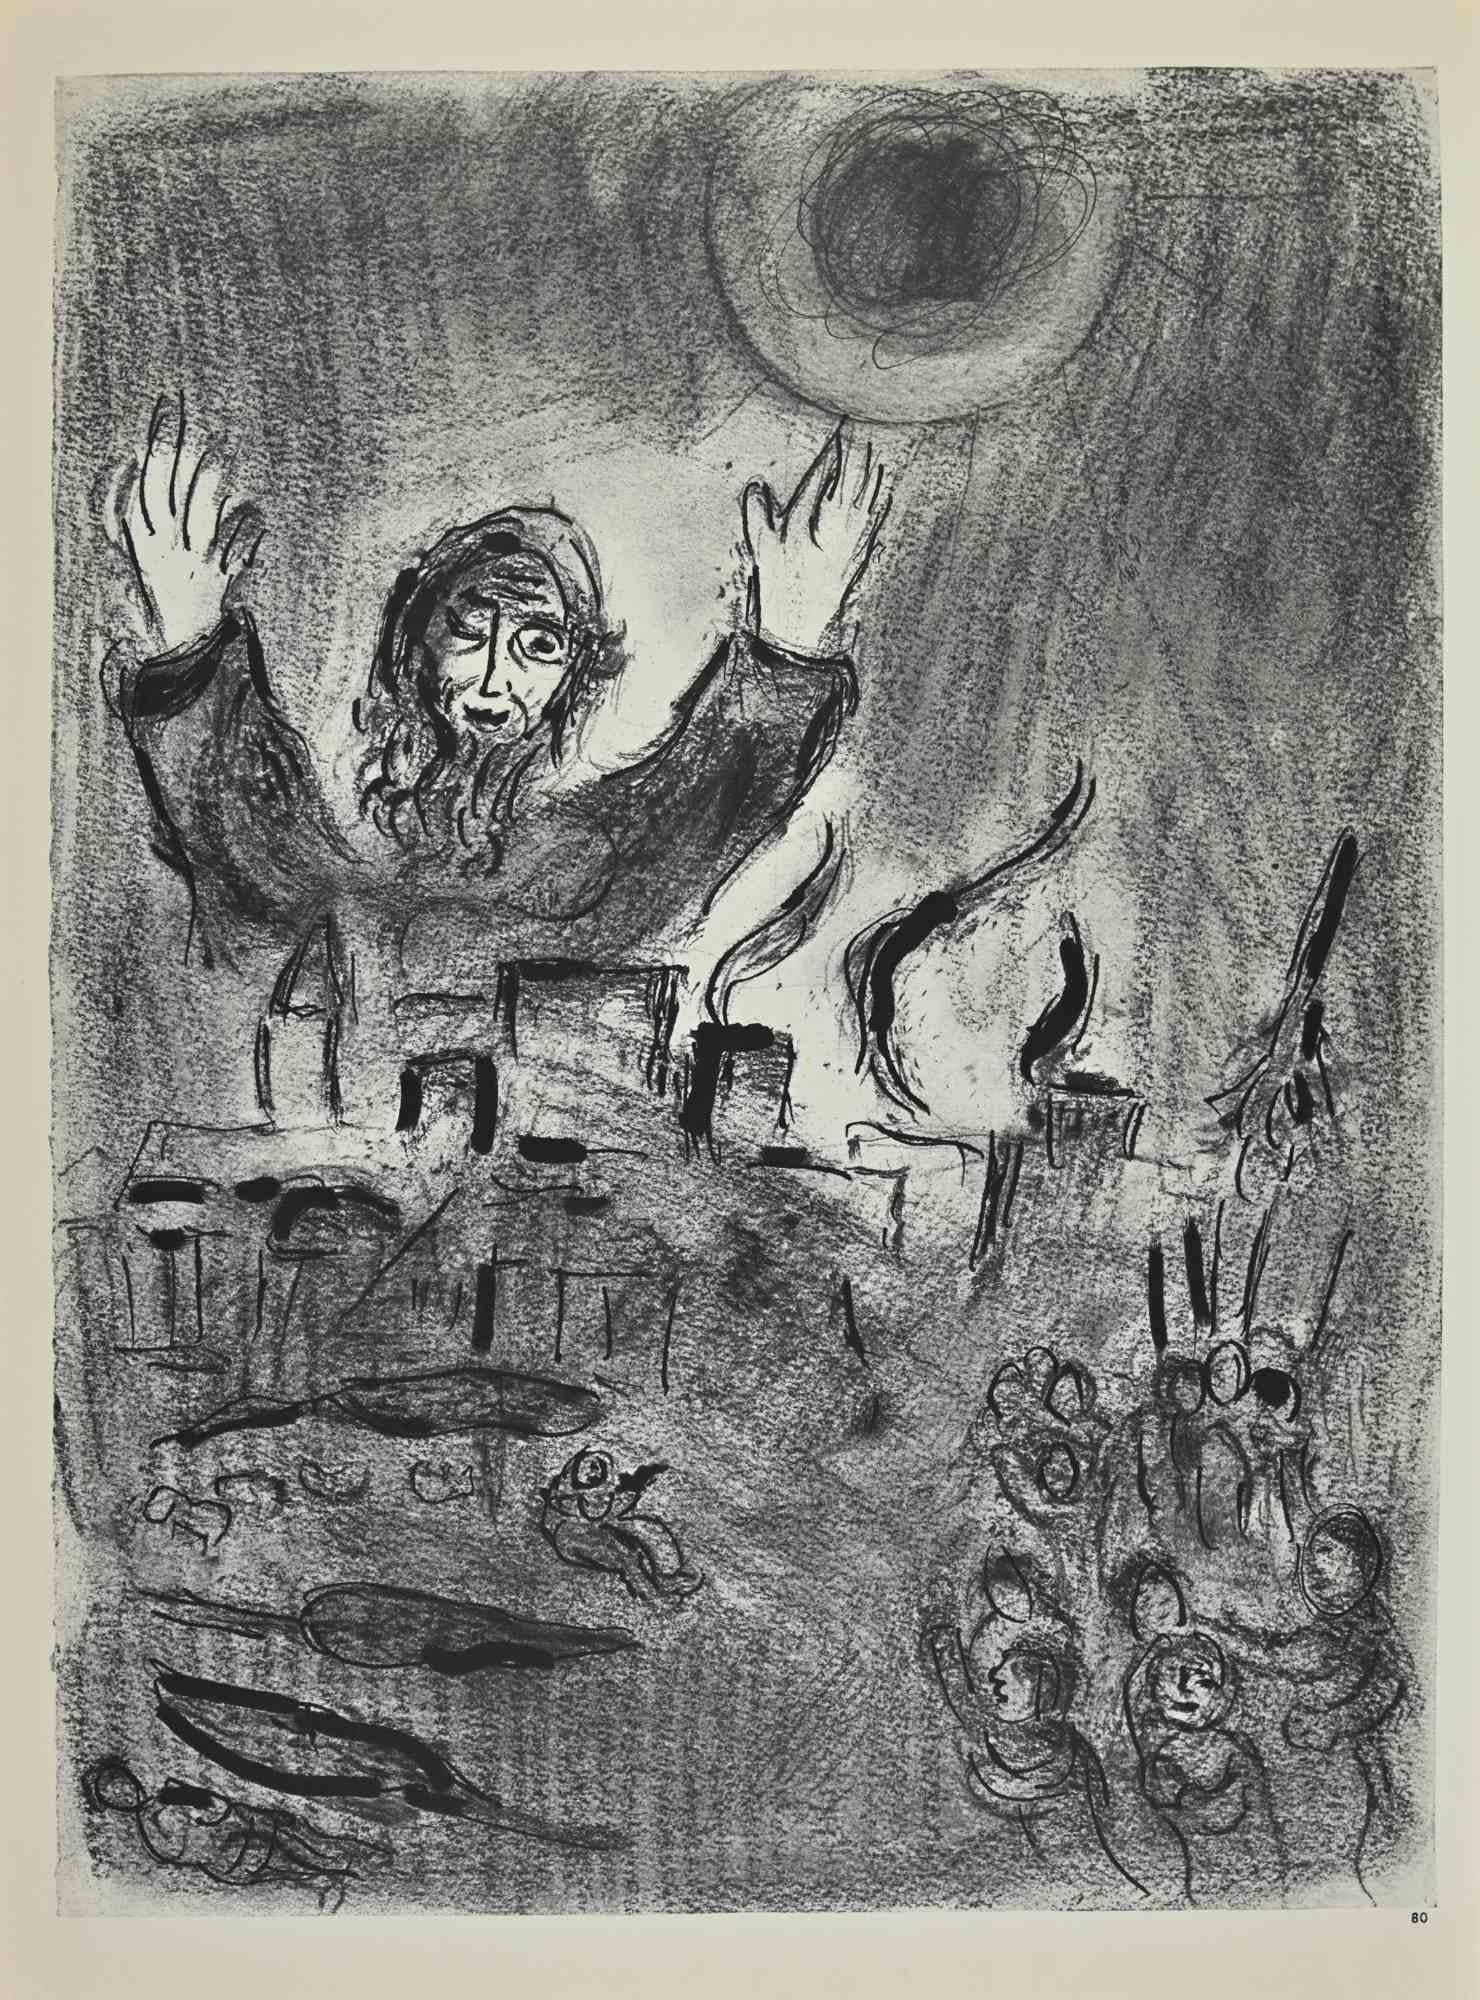 Devastation of Locusts is an artwork realized by Marc Chagall, 1960s.

Lithograph on brown-toned paper, no signature.

Lithograph on both sheets.

Edition of 6500 unsigned lithographs. Printed by Mourlot and published by Tériade, Paris.

Ref.